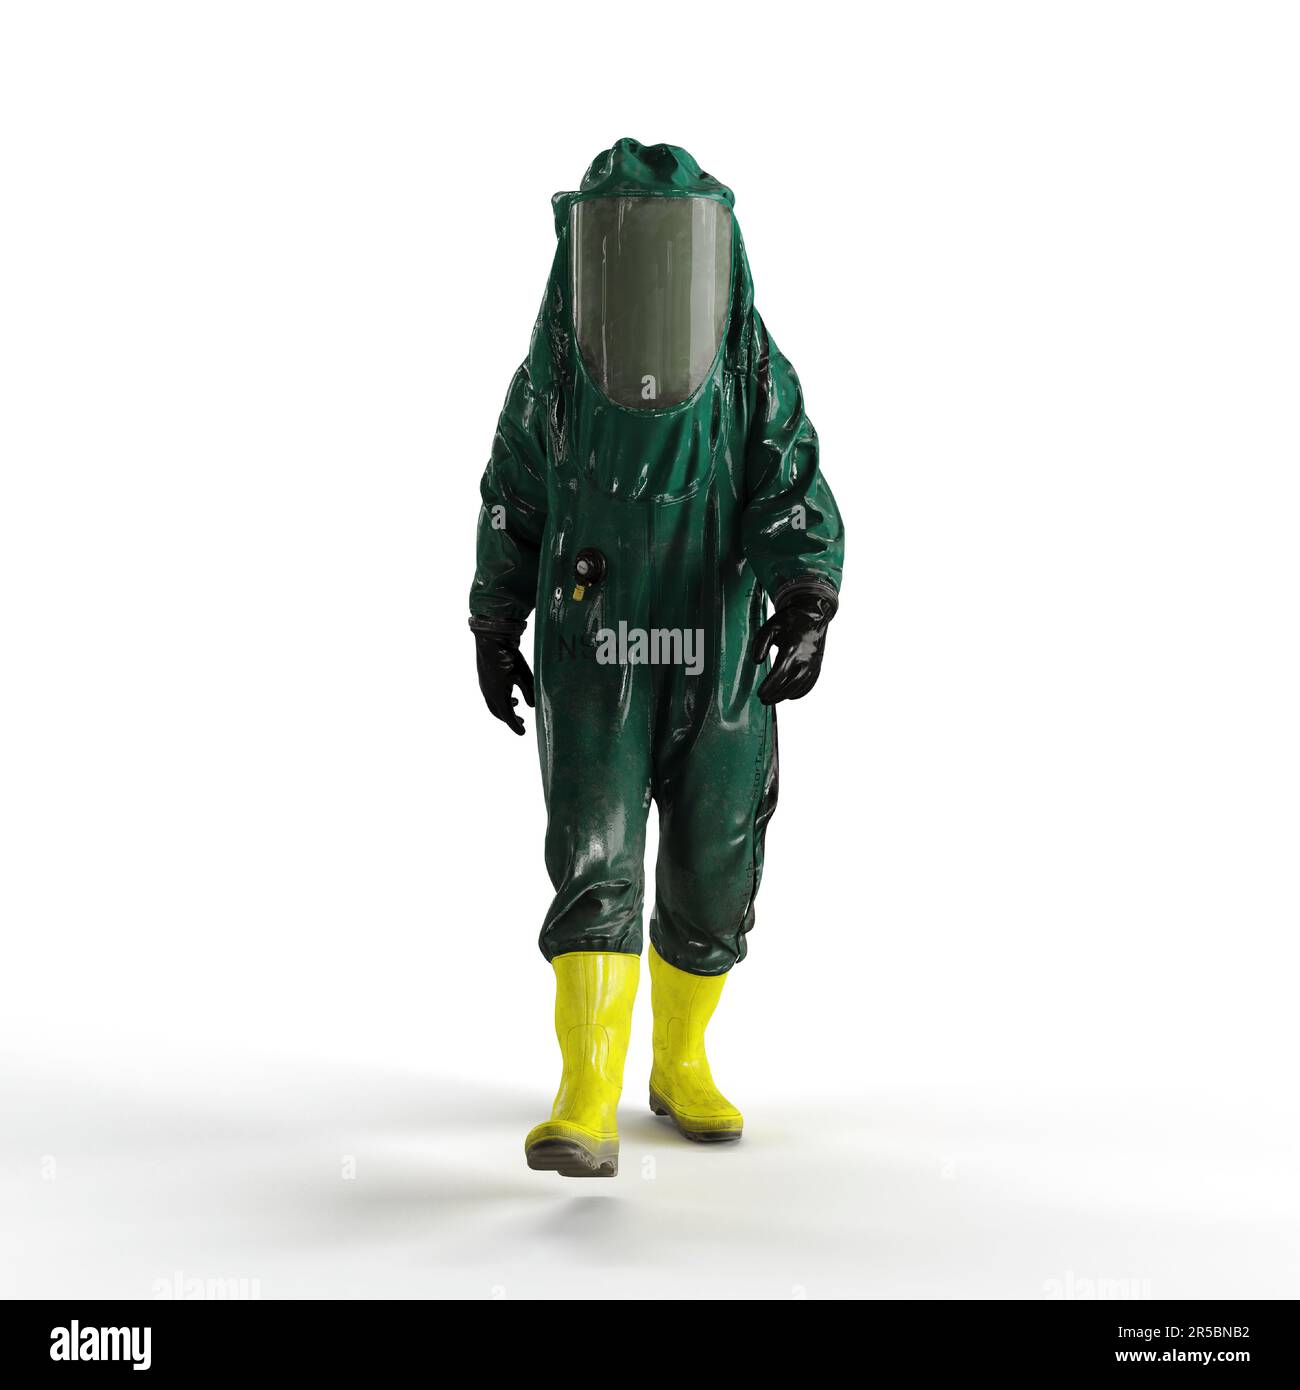 A 3D rendering of a person wearing a green hazard suit, walking on a ...